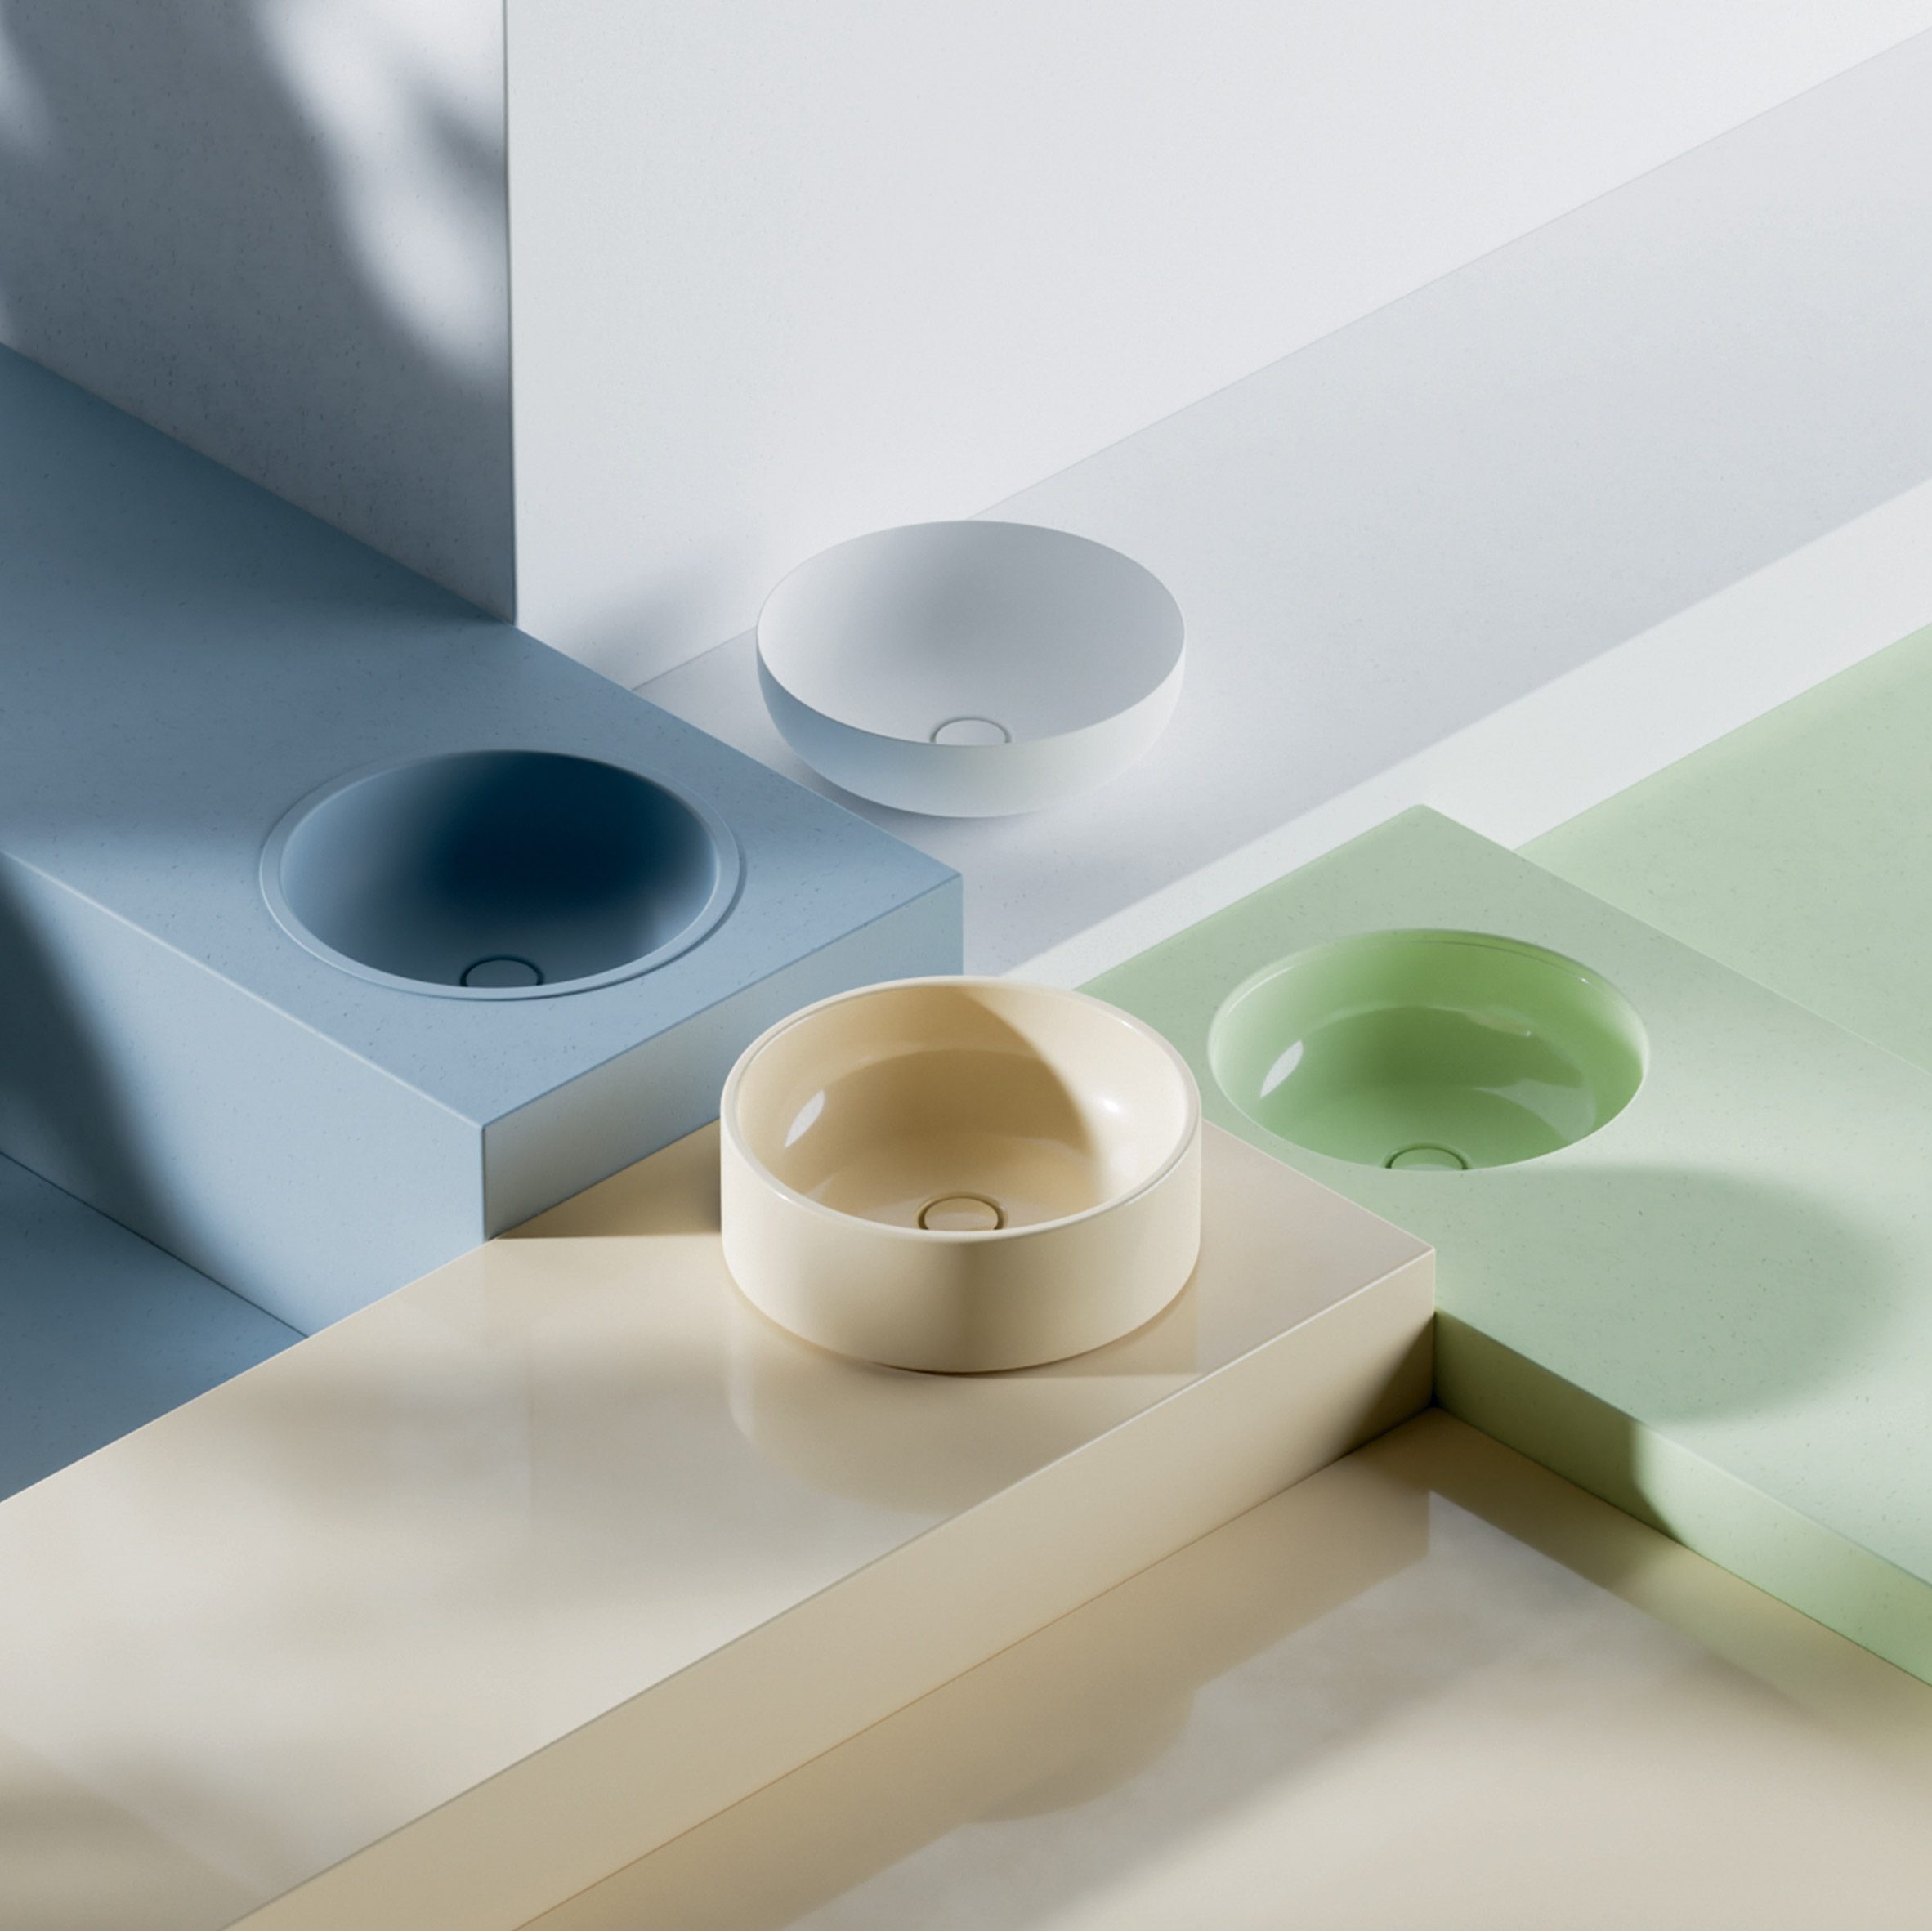 Four BetteBalance basins by Bette in four colours